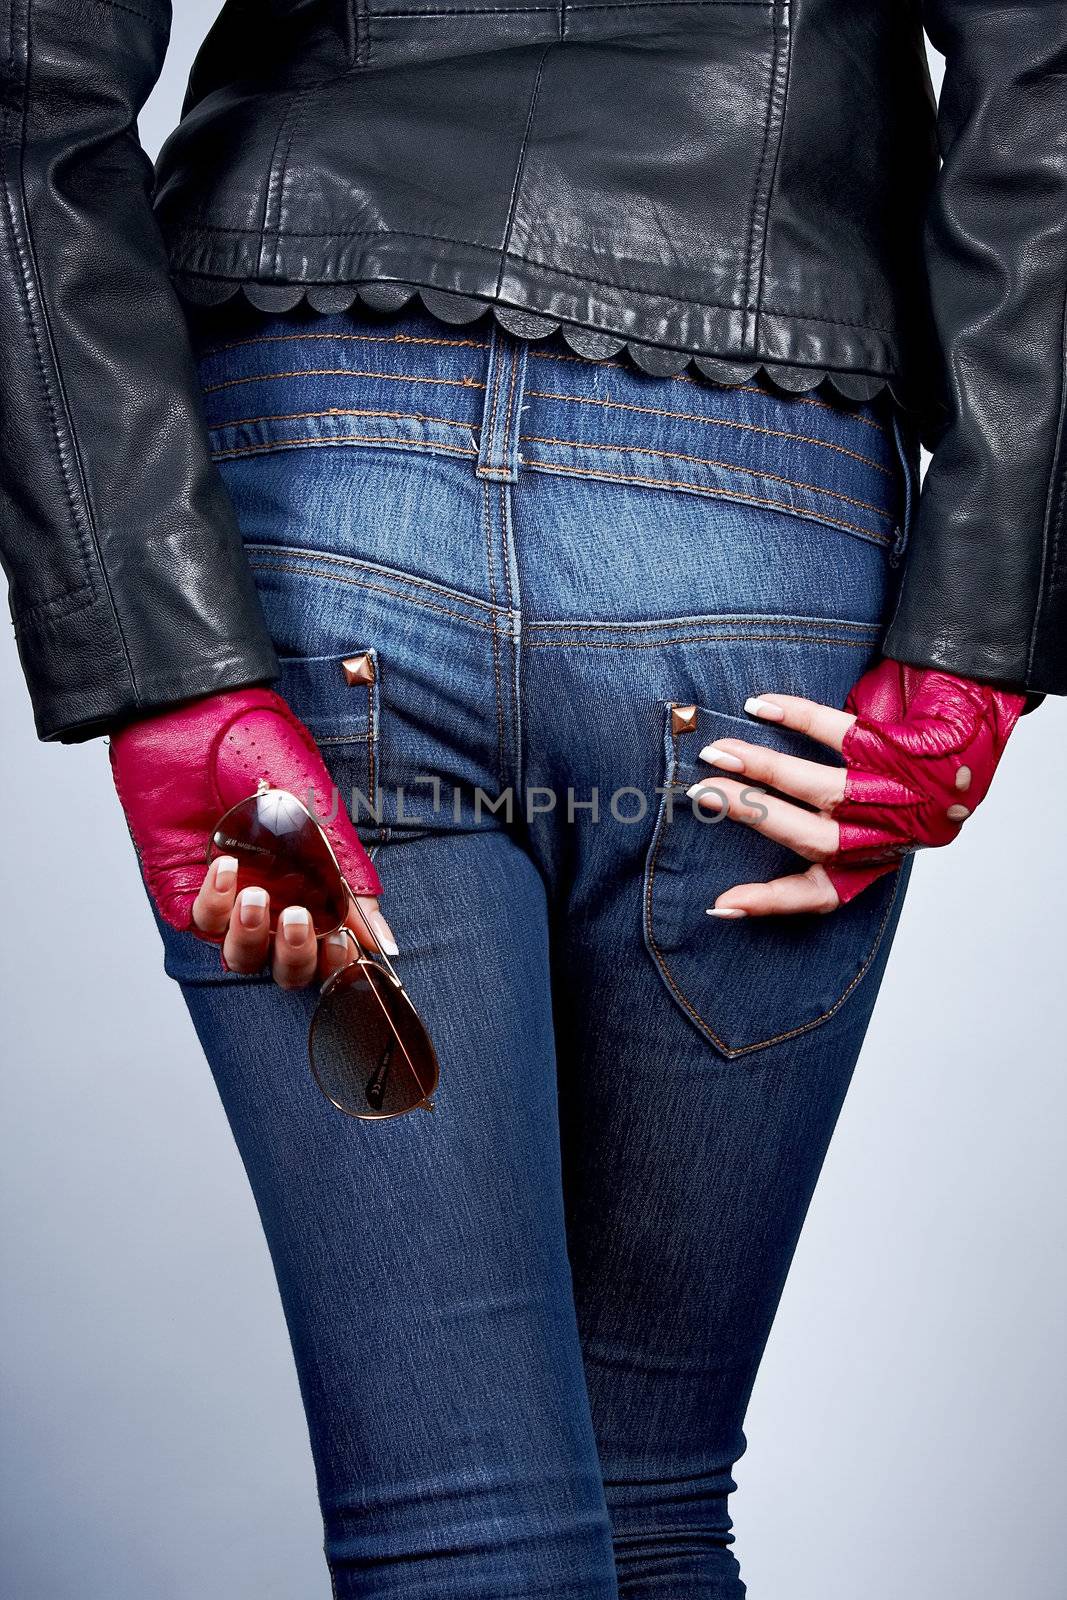 Women's hands with the sunglasses in stylish gloves back on the background of jeans